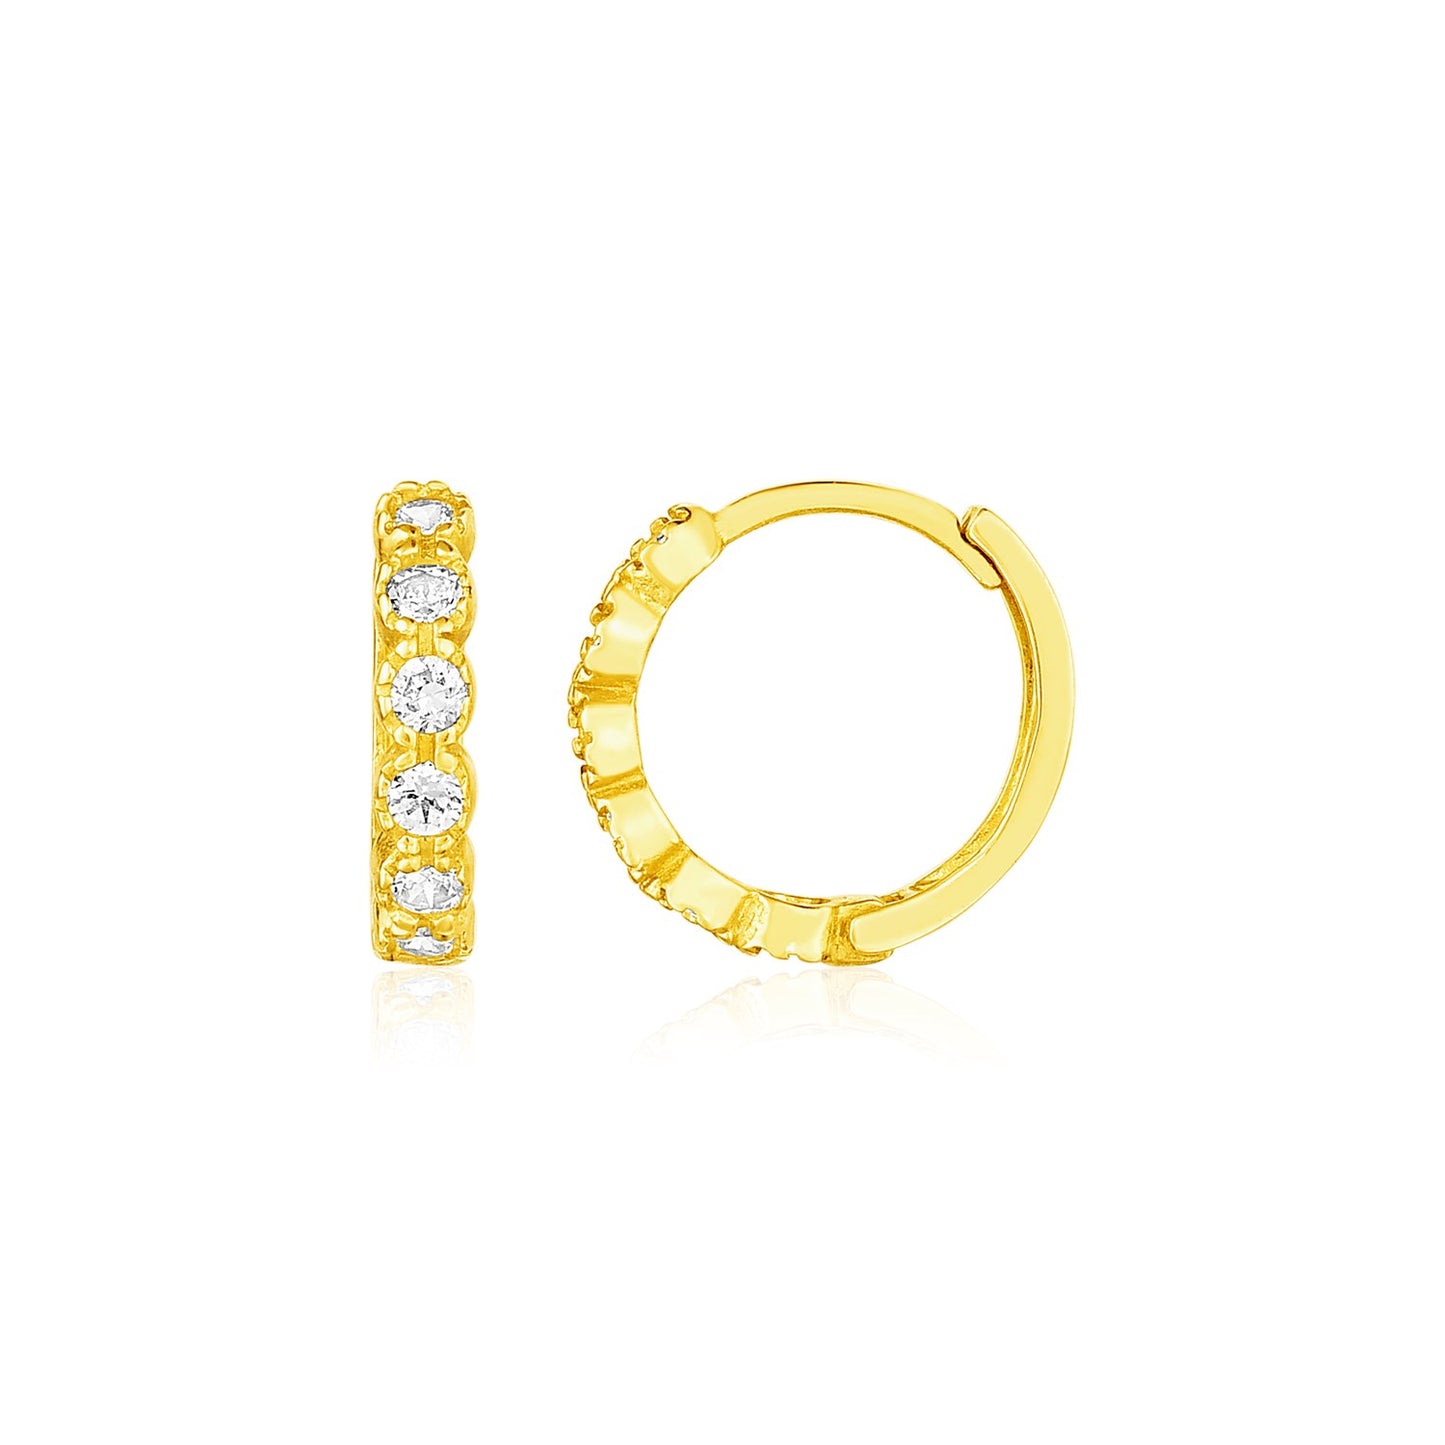 Round Sparkly Huggie Hoops in 14k Yellow Gold